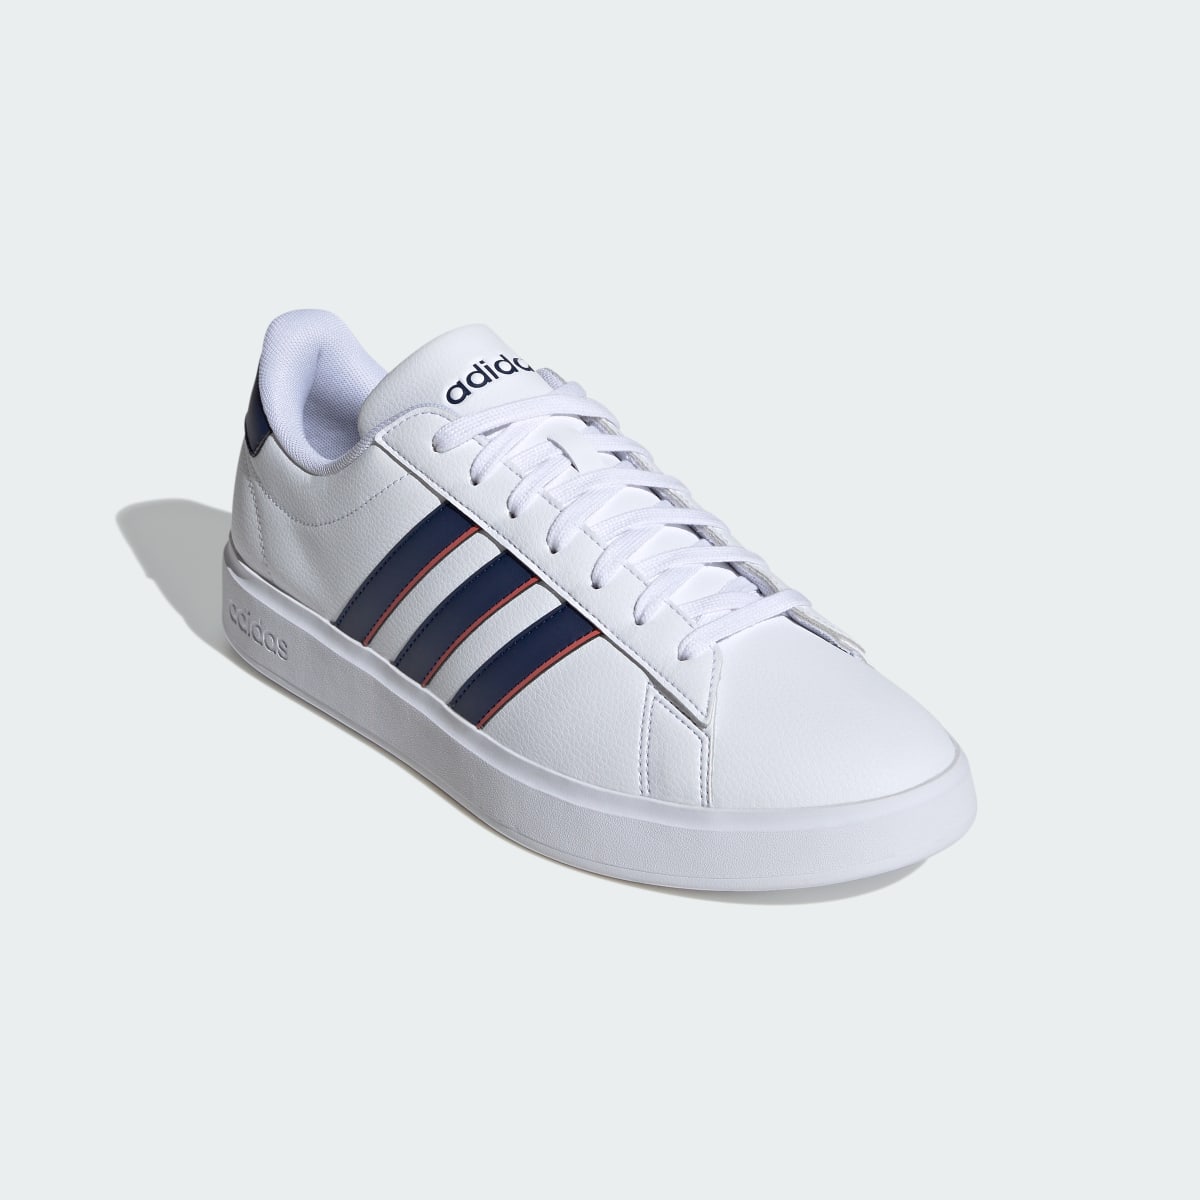 Adidas Grand Court Shoes. 5